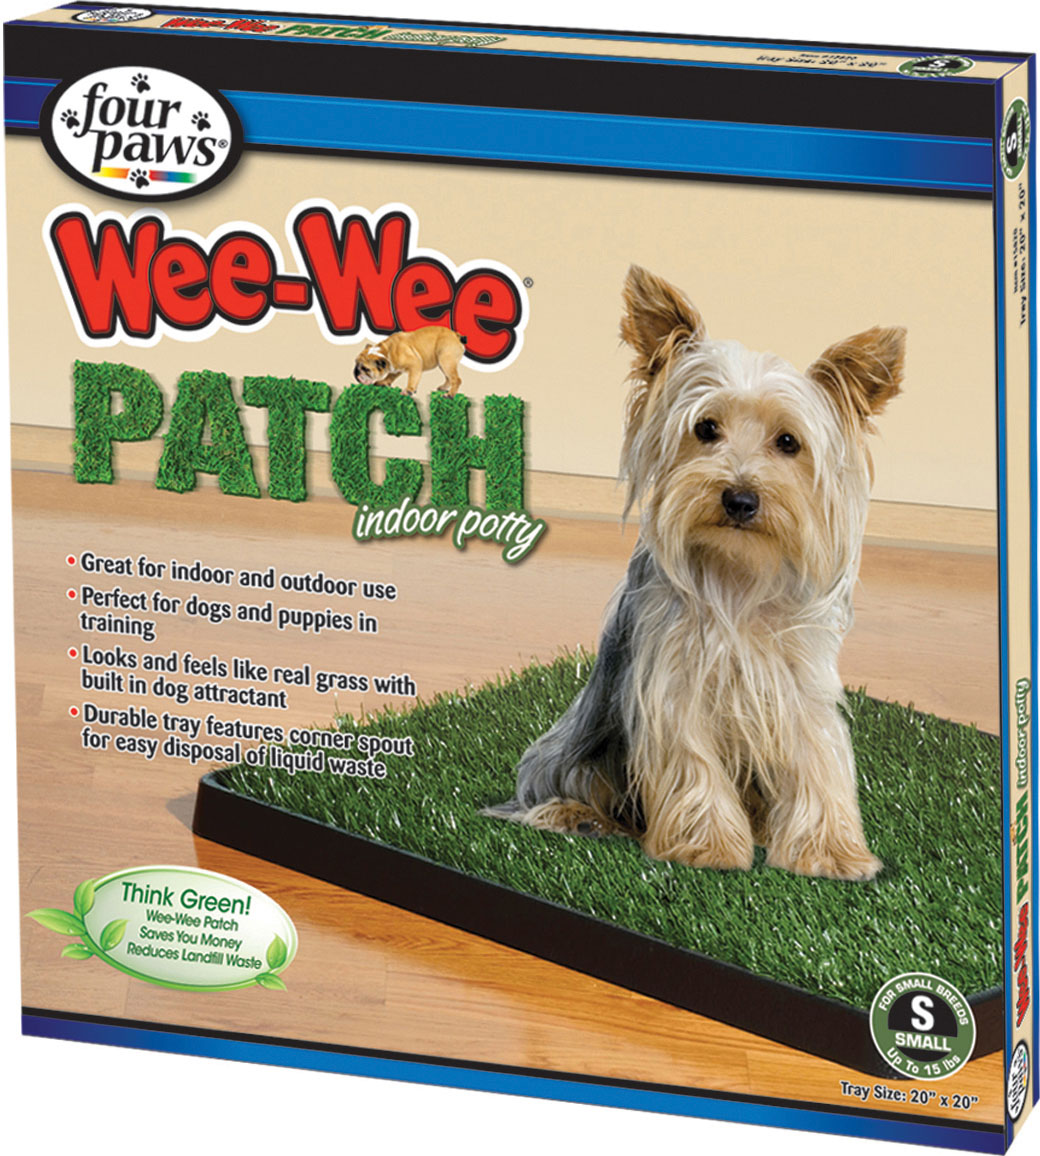 Wee-wee Patch Indoor Potty (Option 1: Small)